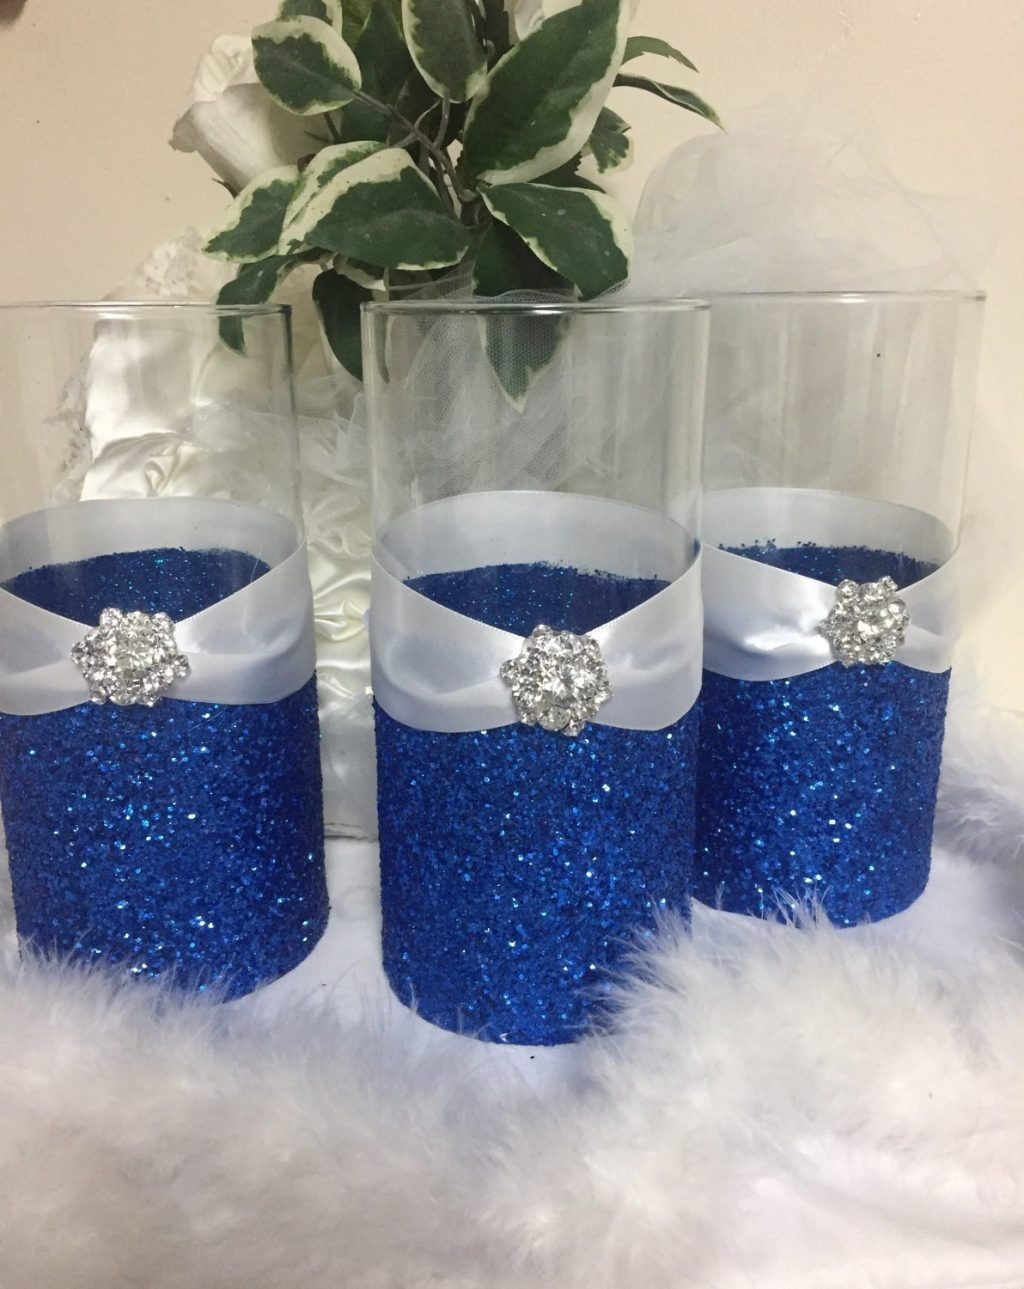 25 Trendy Small Teal Vase 2024 free download small teal vase of wedding decorations centerpieces beautiful tallh vases glitter vase within wedding decorations centerpieces beautiful tallh vases glitter vase centerpiece diy vasei 0d bal